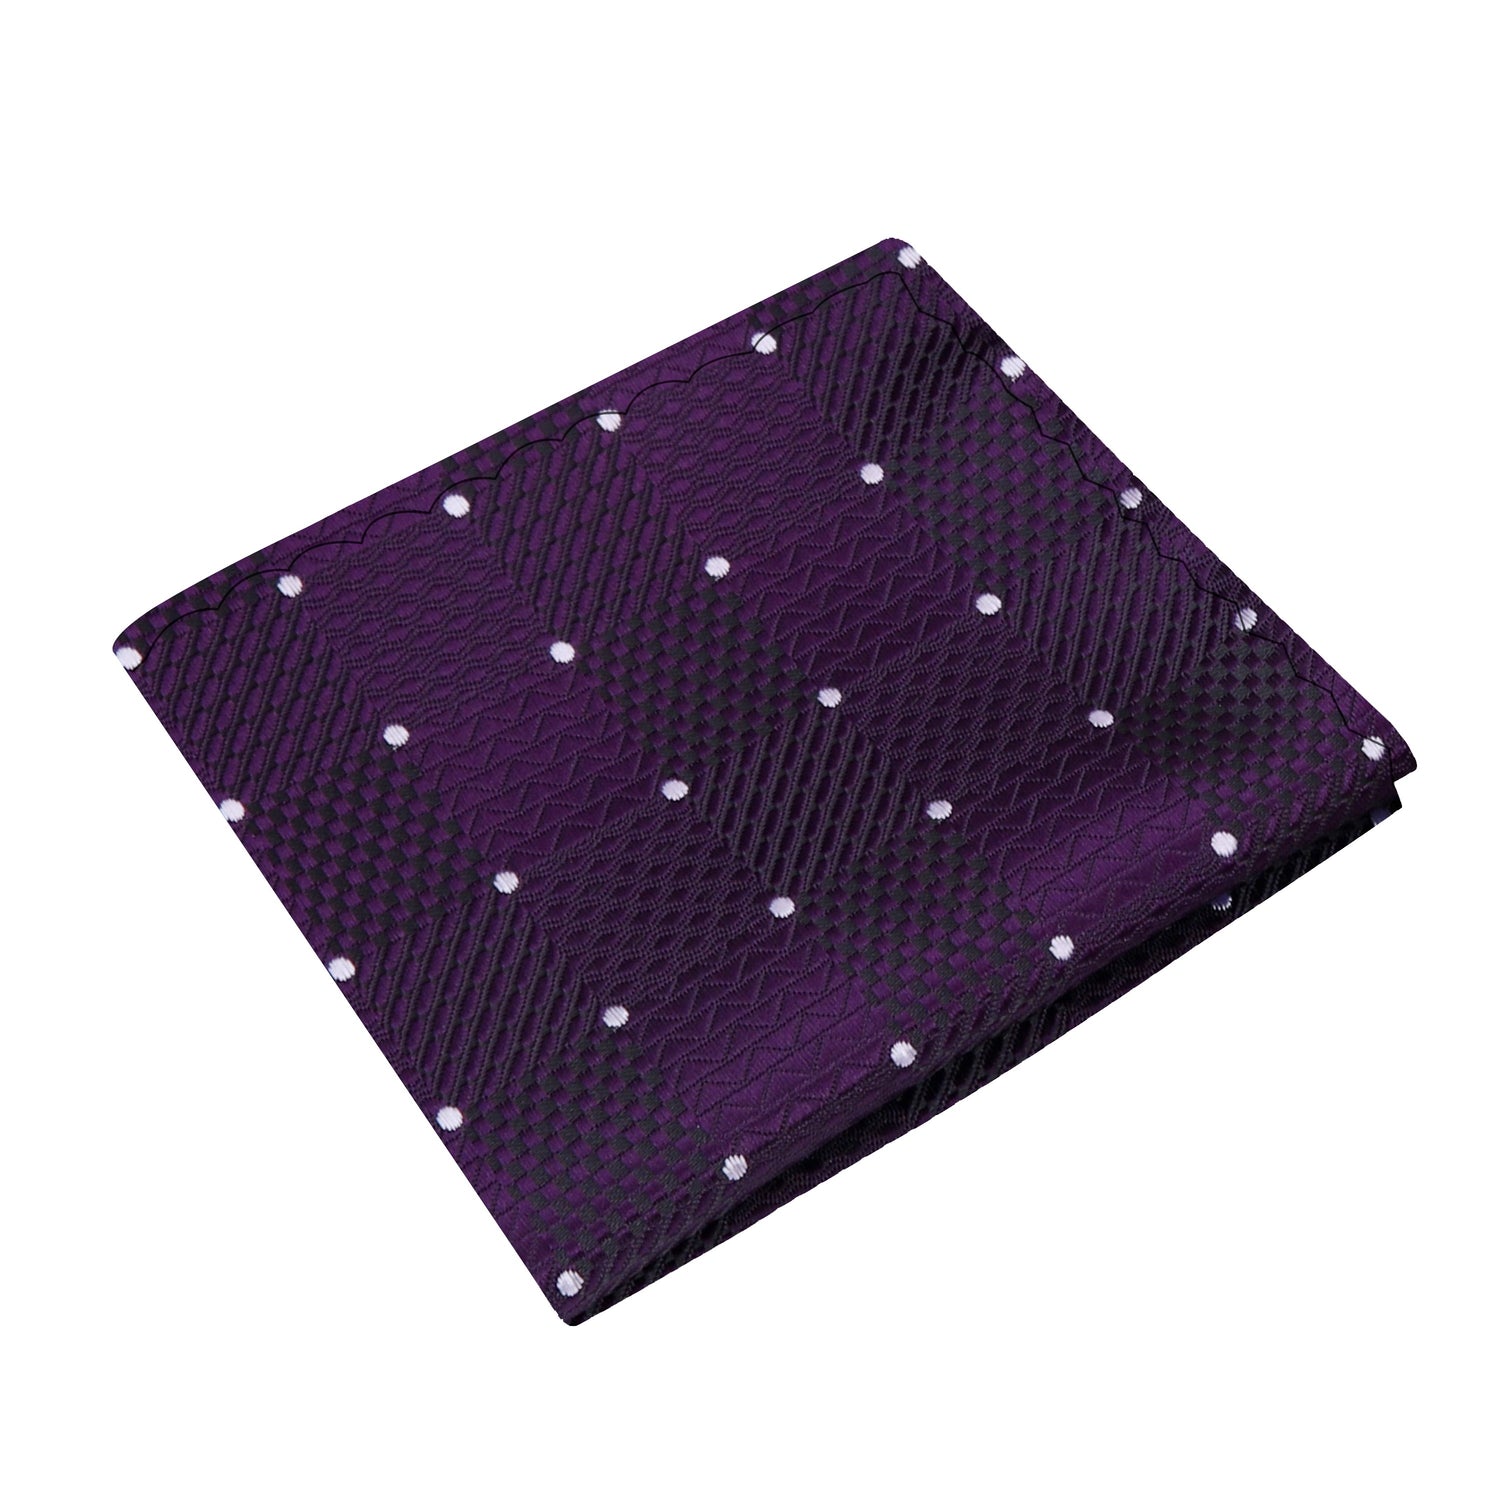 A Deep Purple, White Color Geometric Check with Small Dot Pocket Square